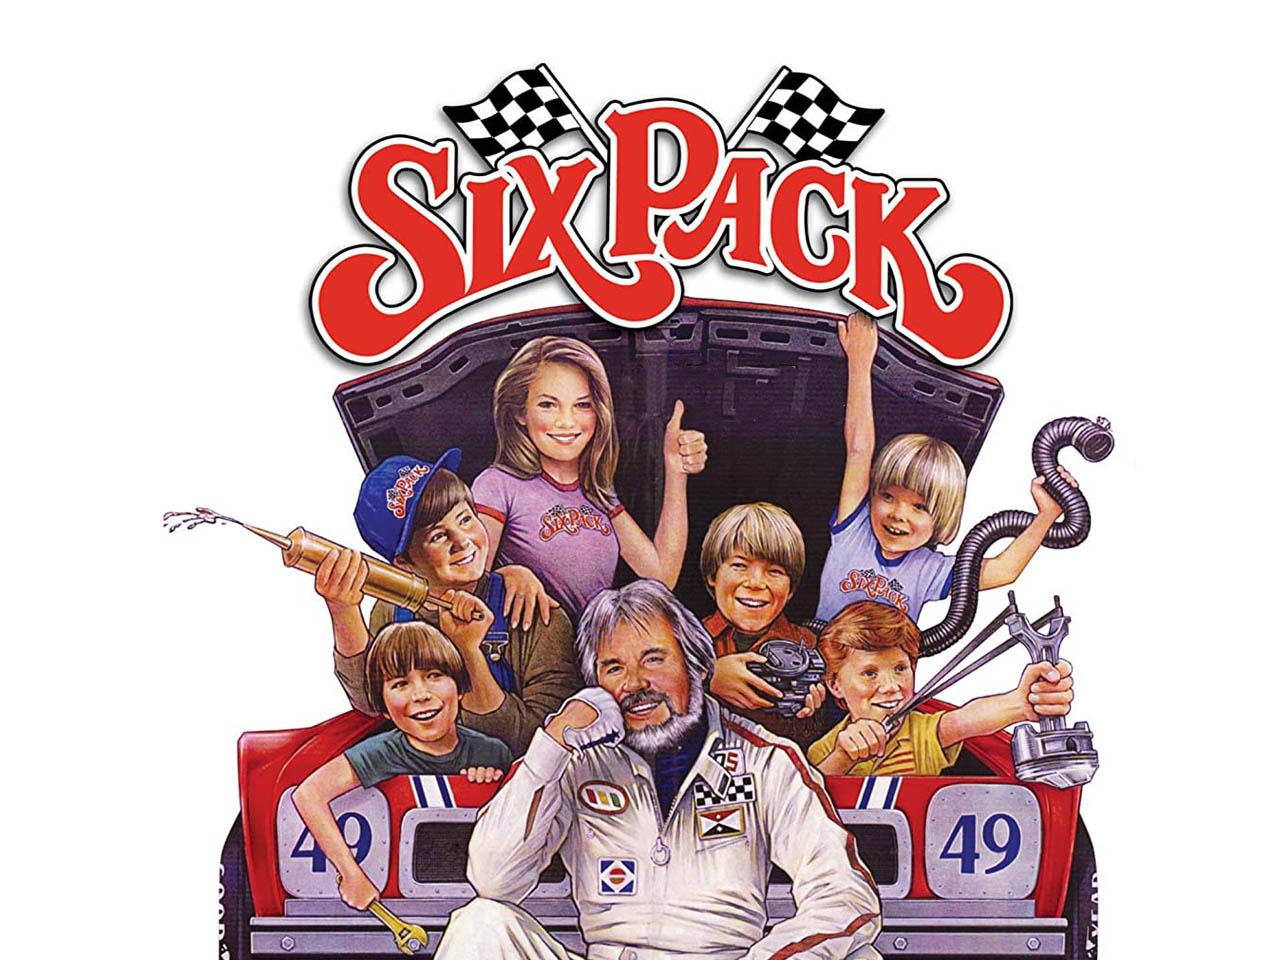 1982 Movie Project - Six Pack - 01